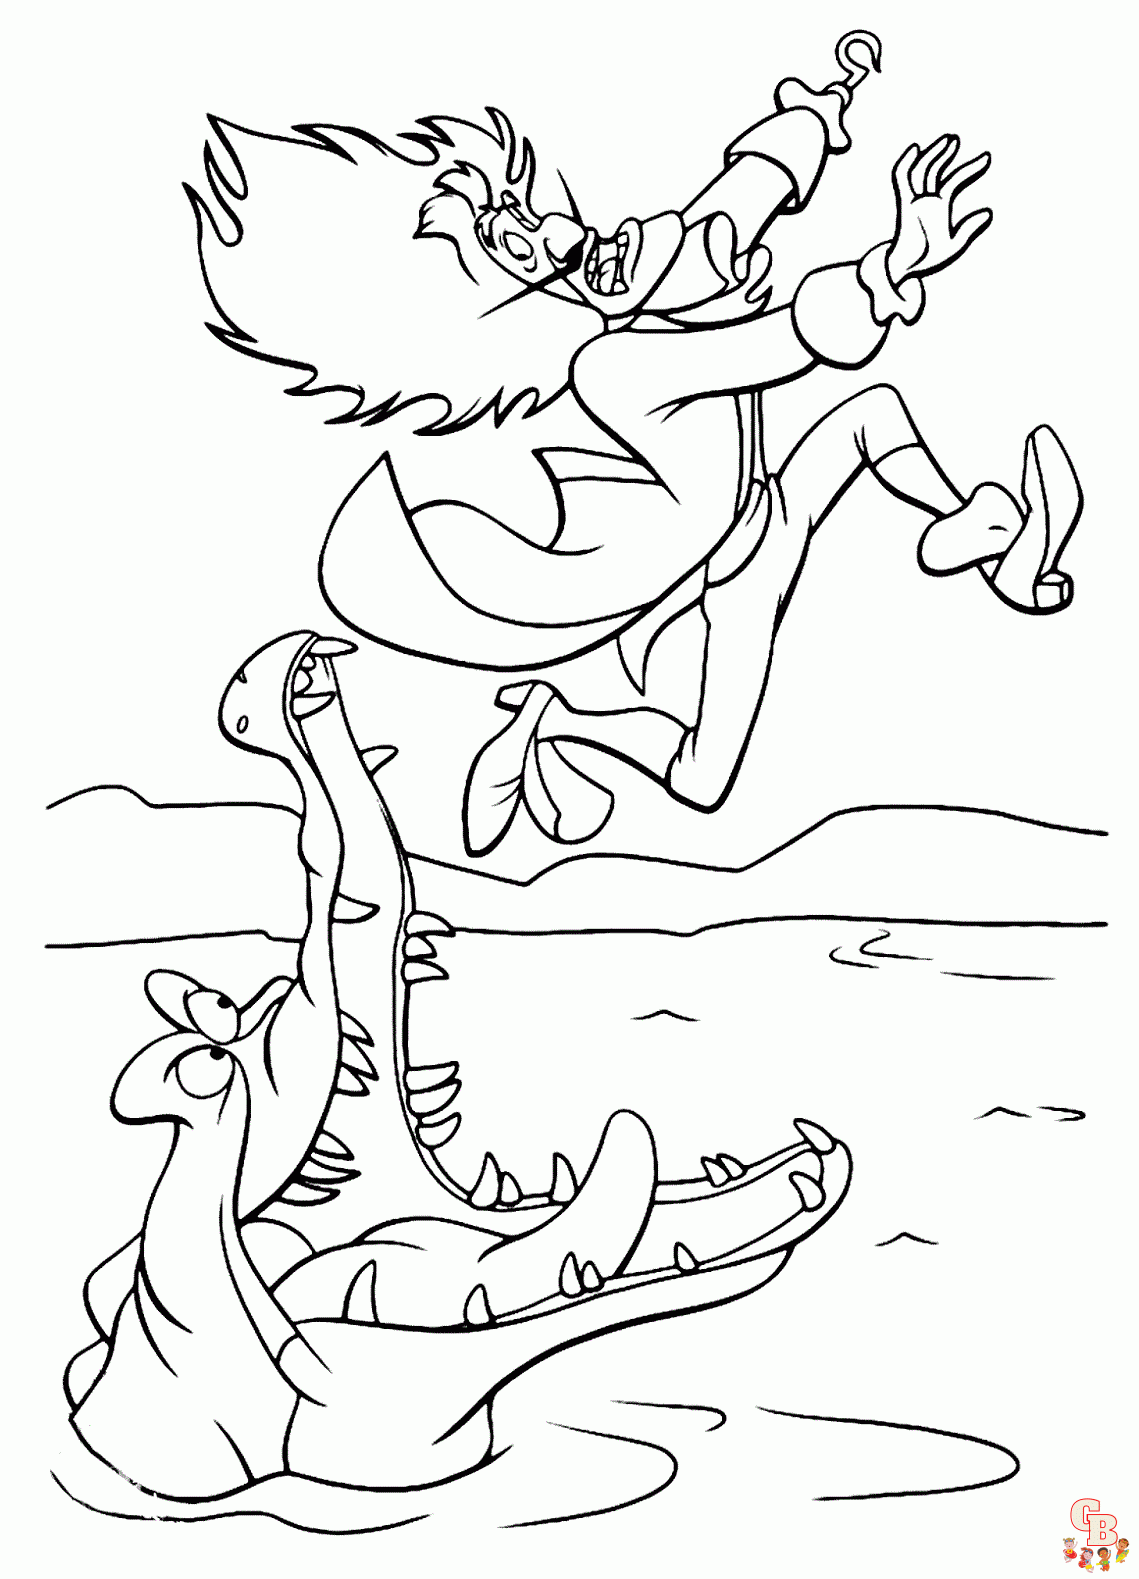 Captain Hook coloring pages to print